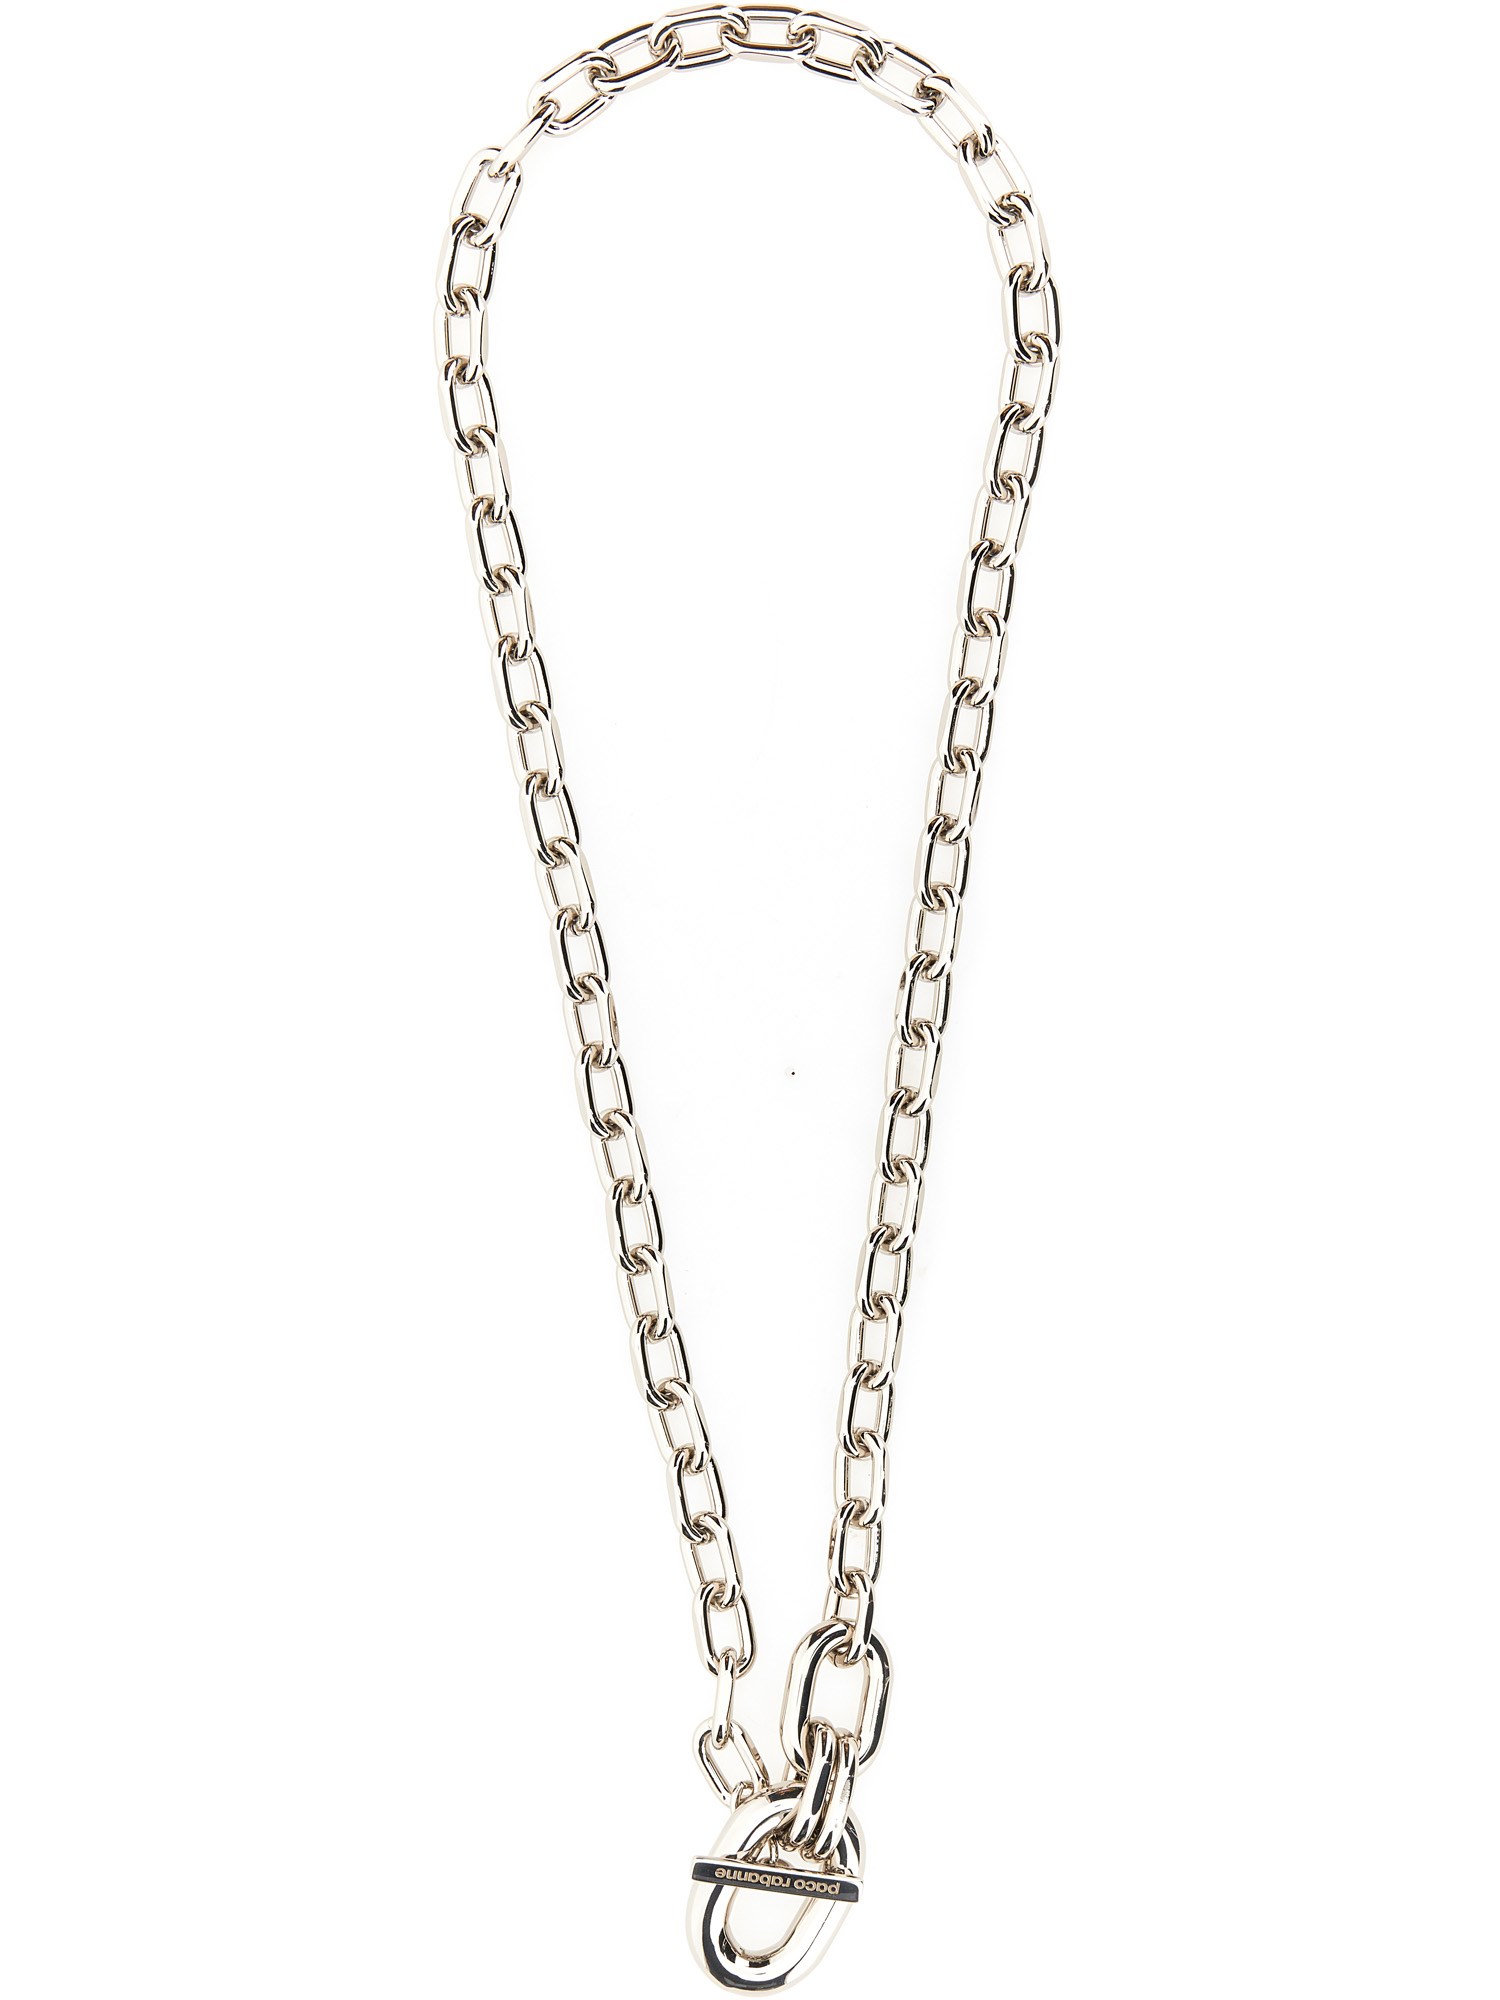 PACO RABANNE NECKLACE WITH PENDANT